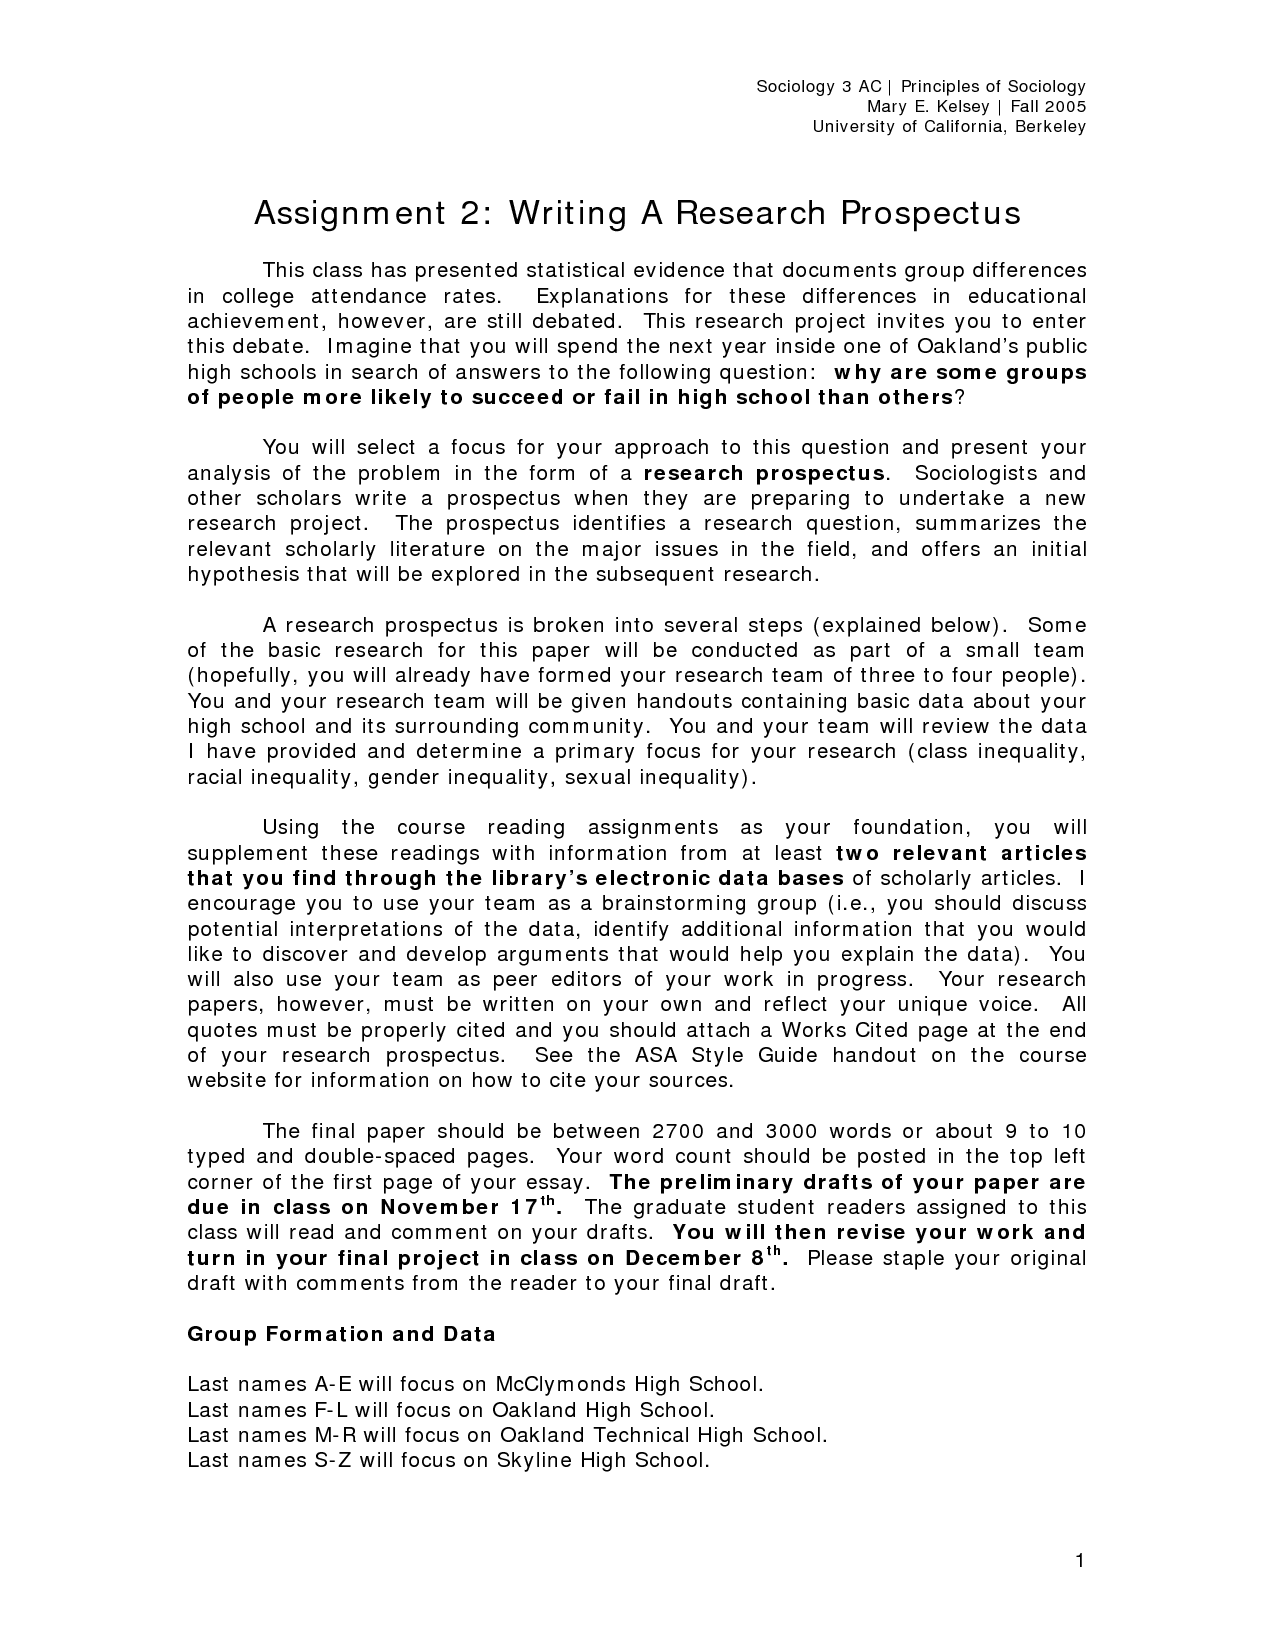 sample prospectus for research paper - tips how to write a good prospectus